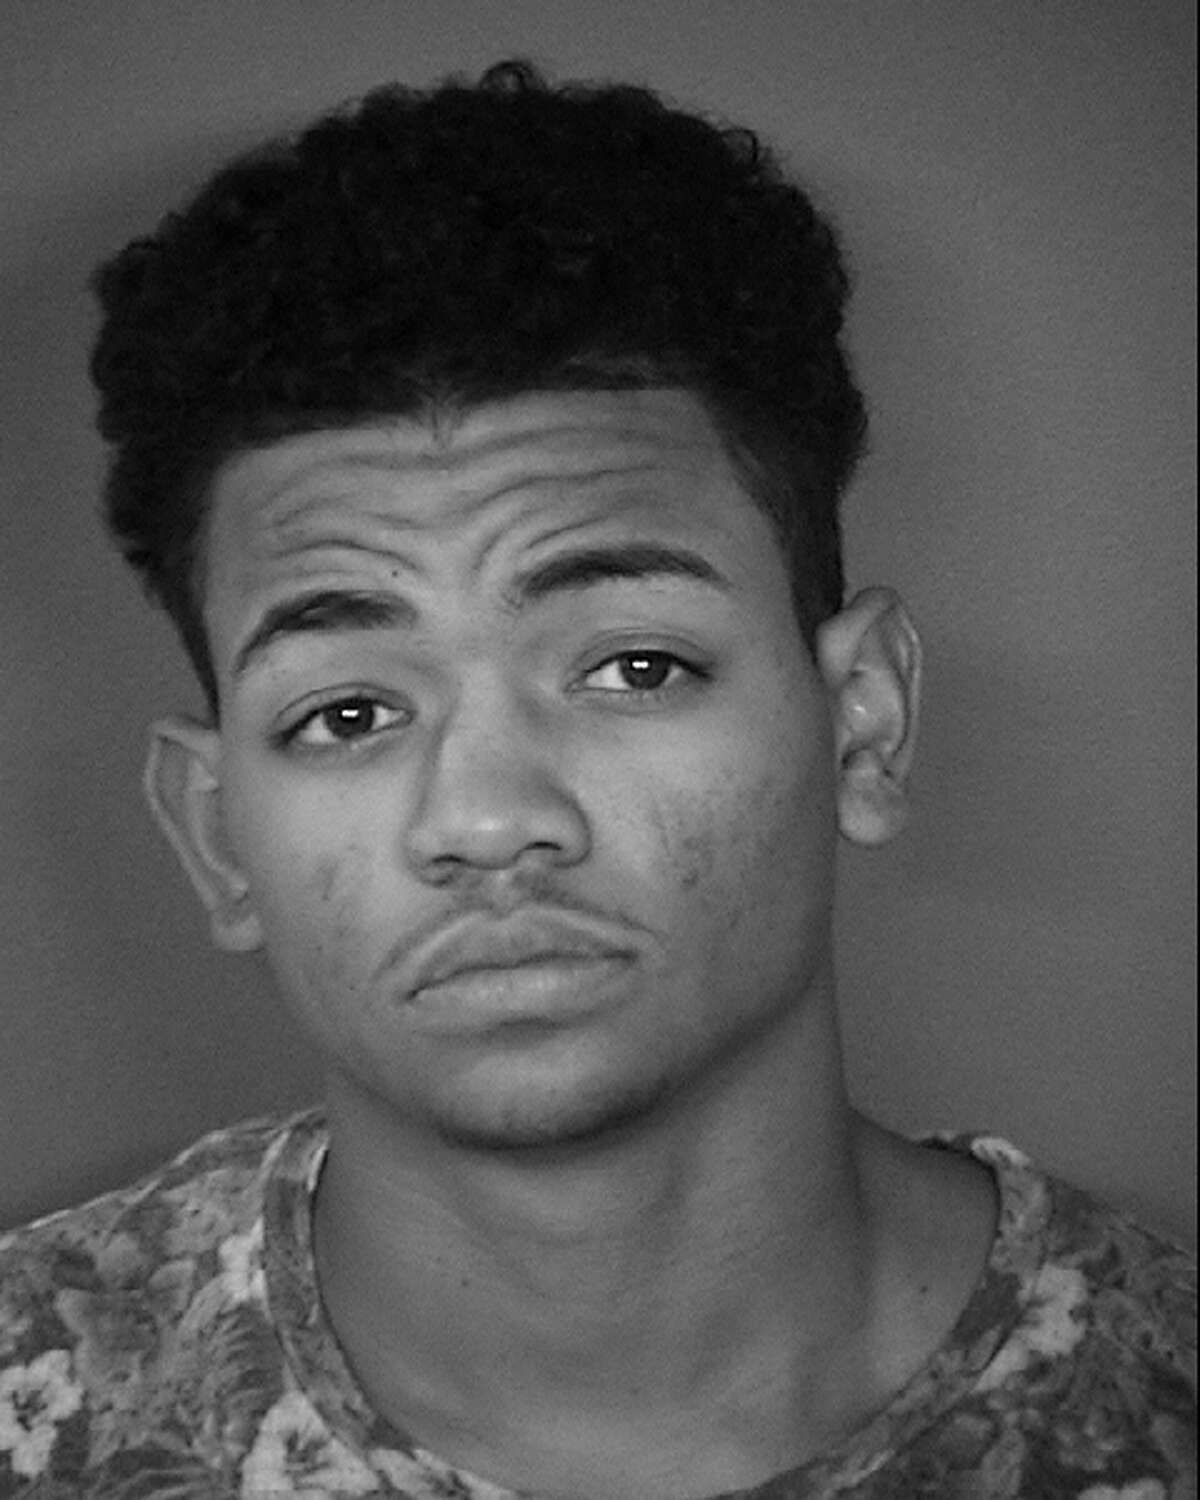 Jeremiah Jazzeniah Corrales, 19, remains in the Bexar County Jail on a charge of aggravated robbery.